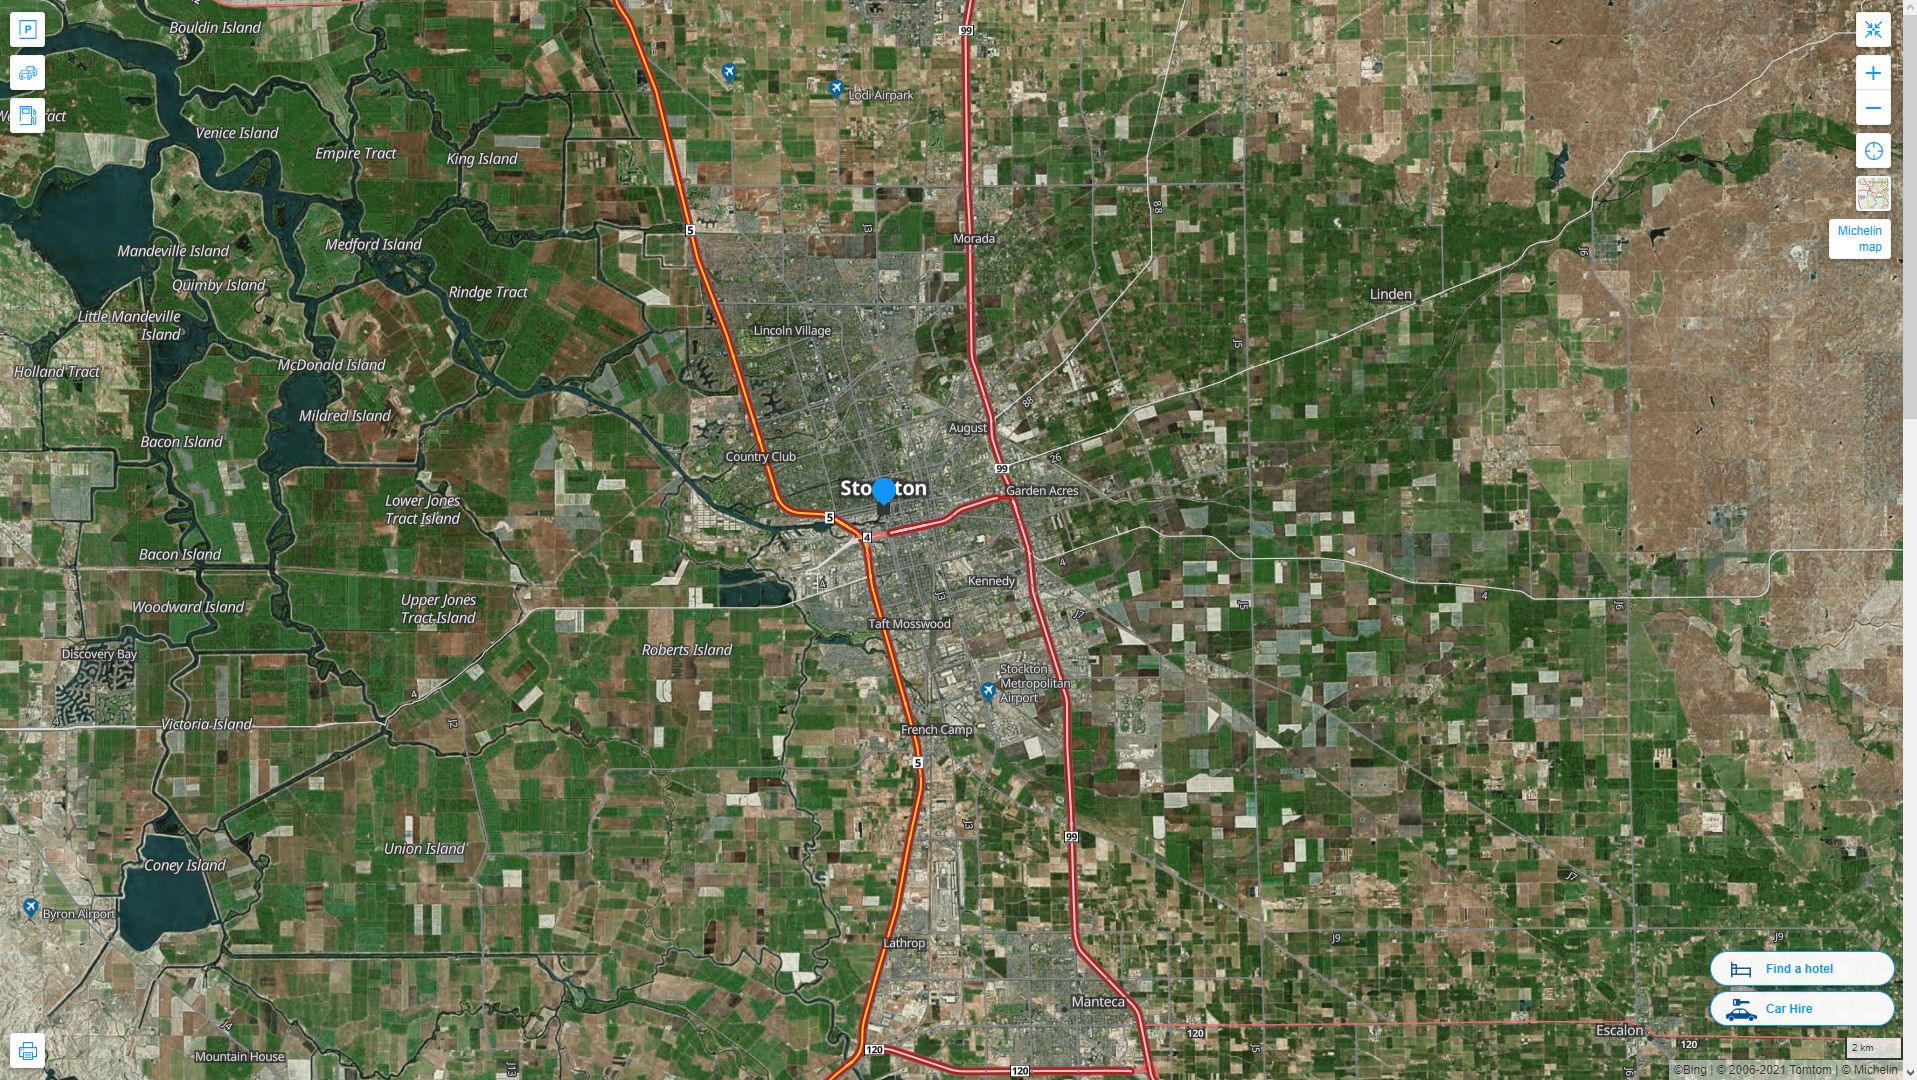 Stockton California Highway and Road Map with Satellite View